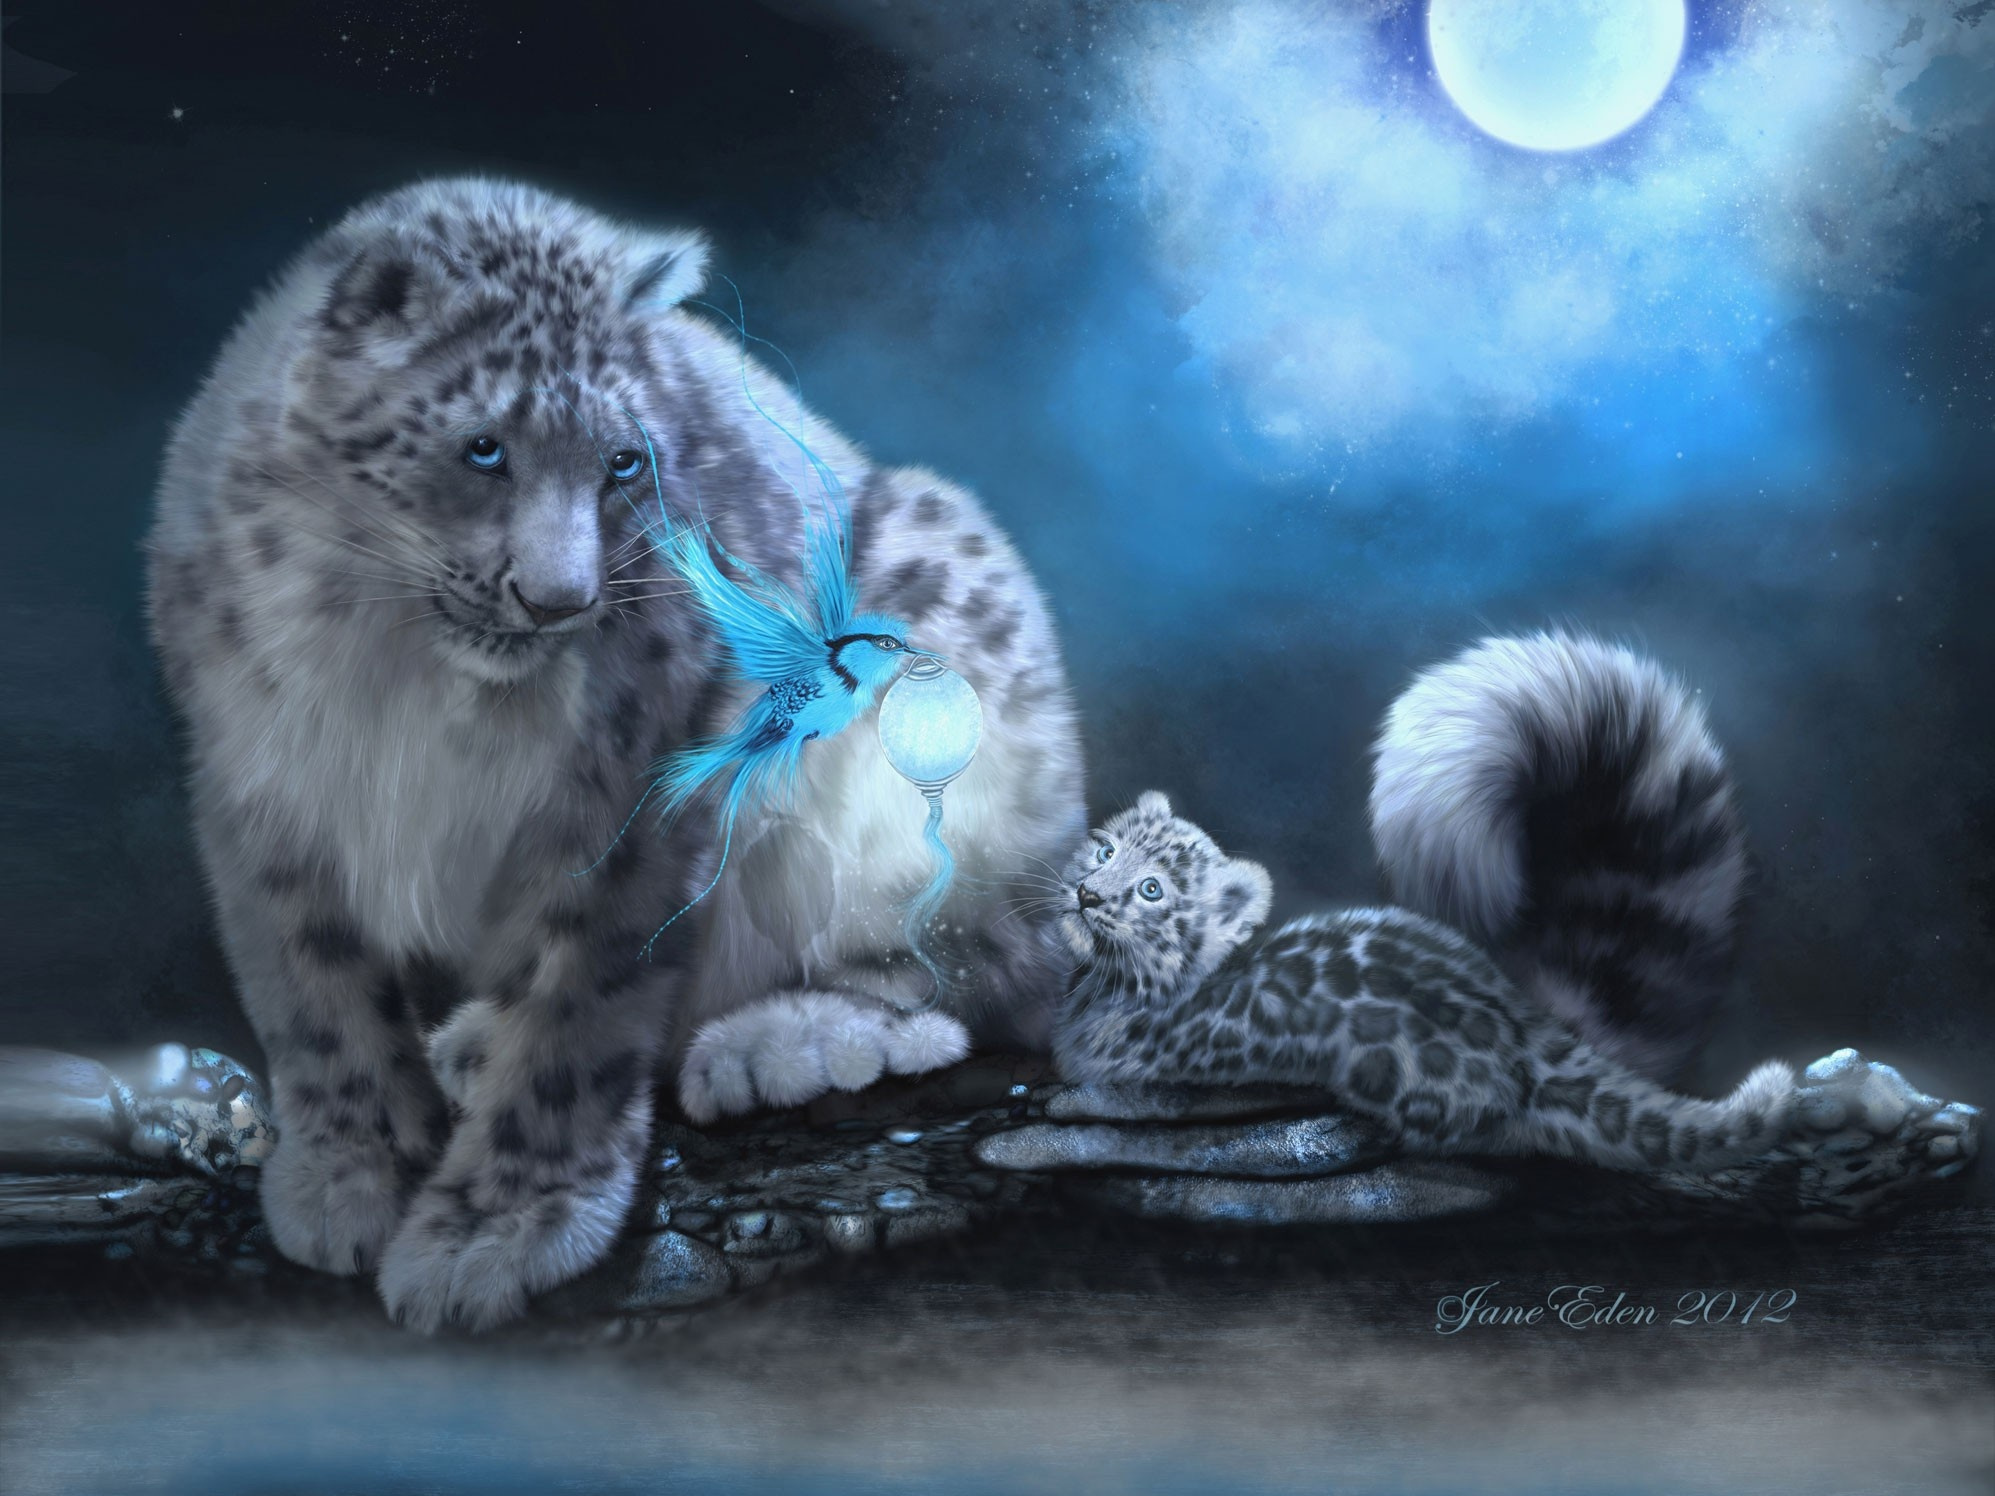 The Snow Leopards And The Fantasy Bird by Jane Eden